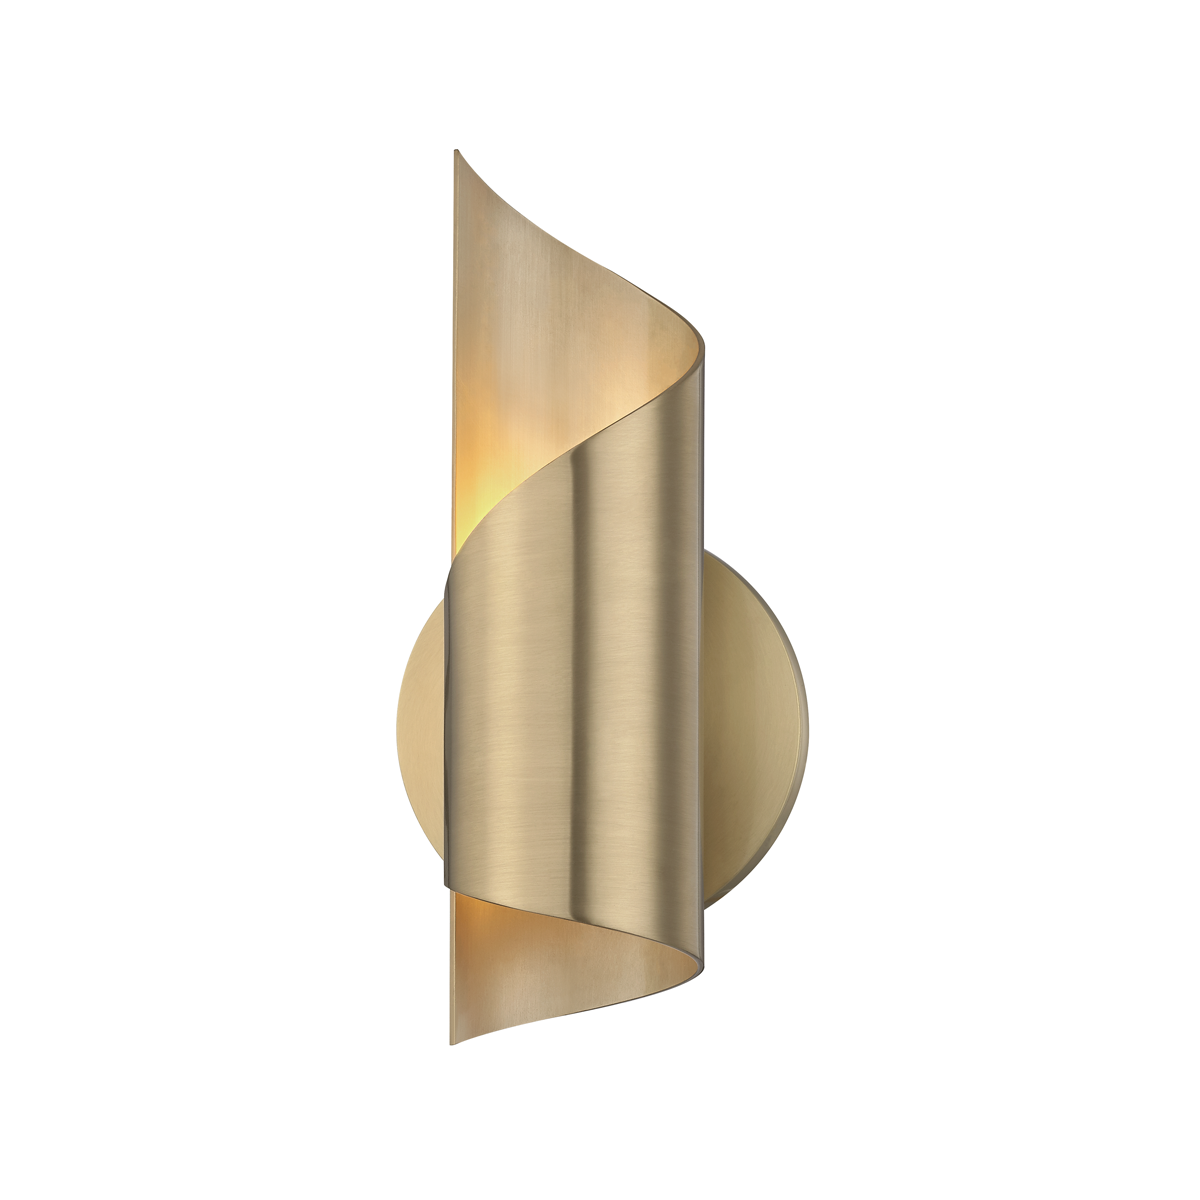 Hudson Valley Lighting Evie Wall Sconce in Warm Brass Coloured Steel